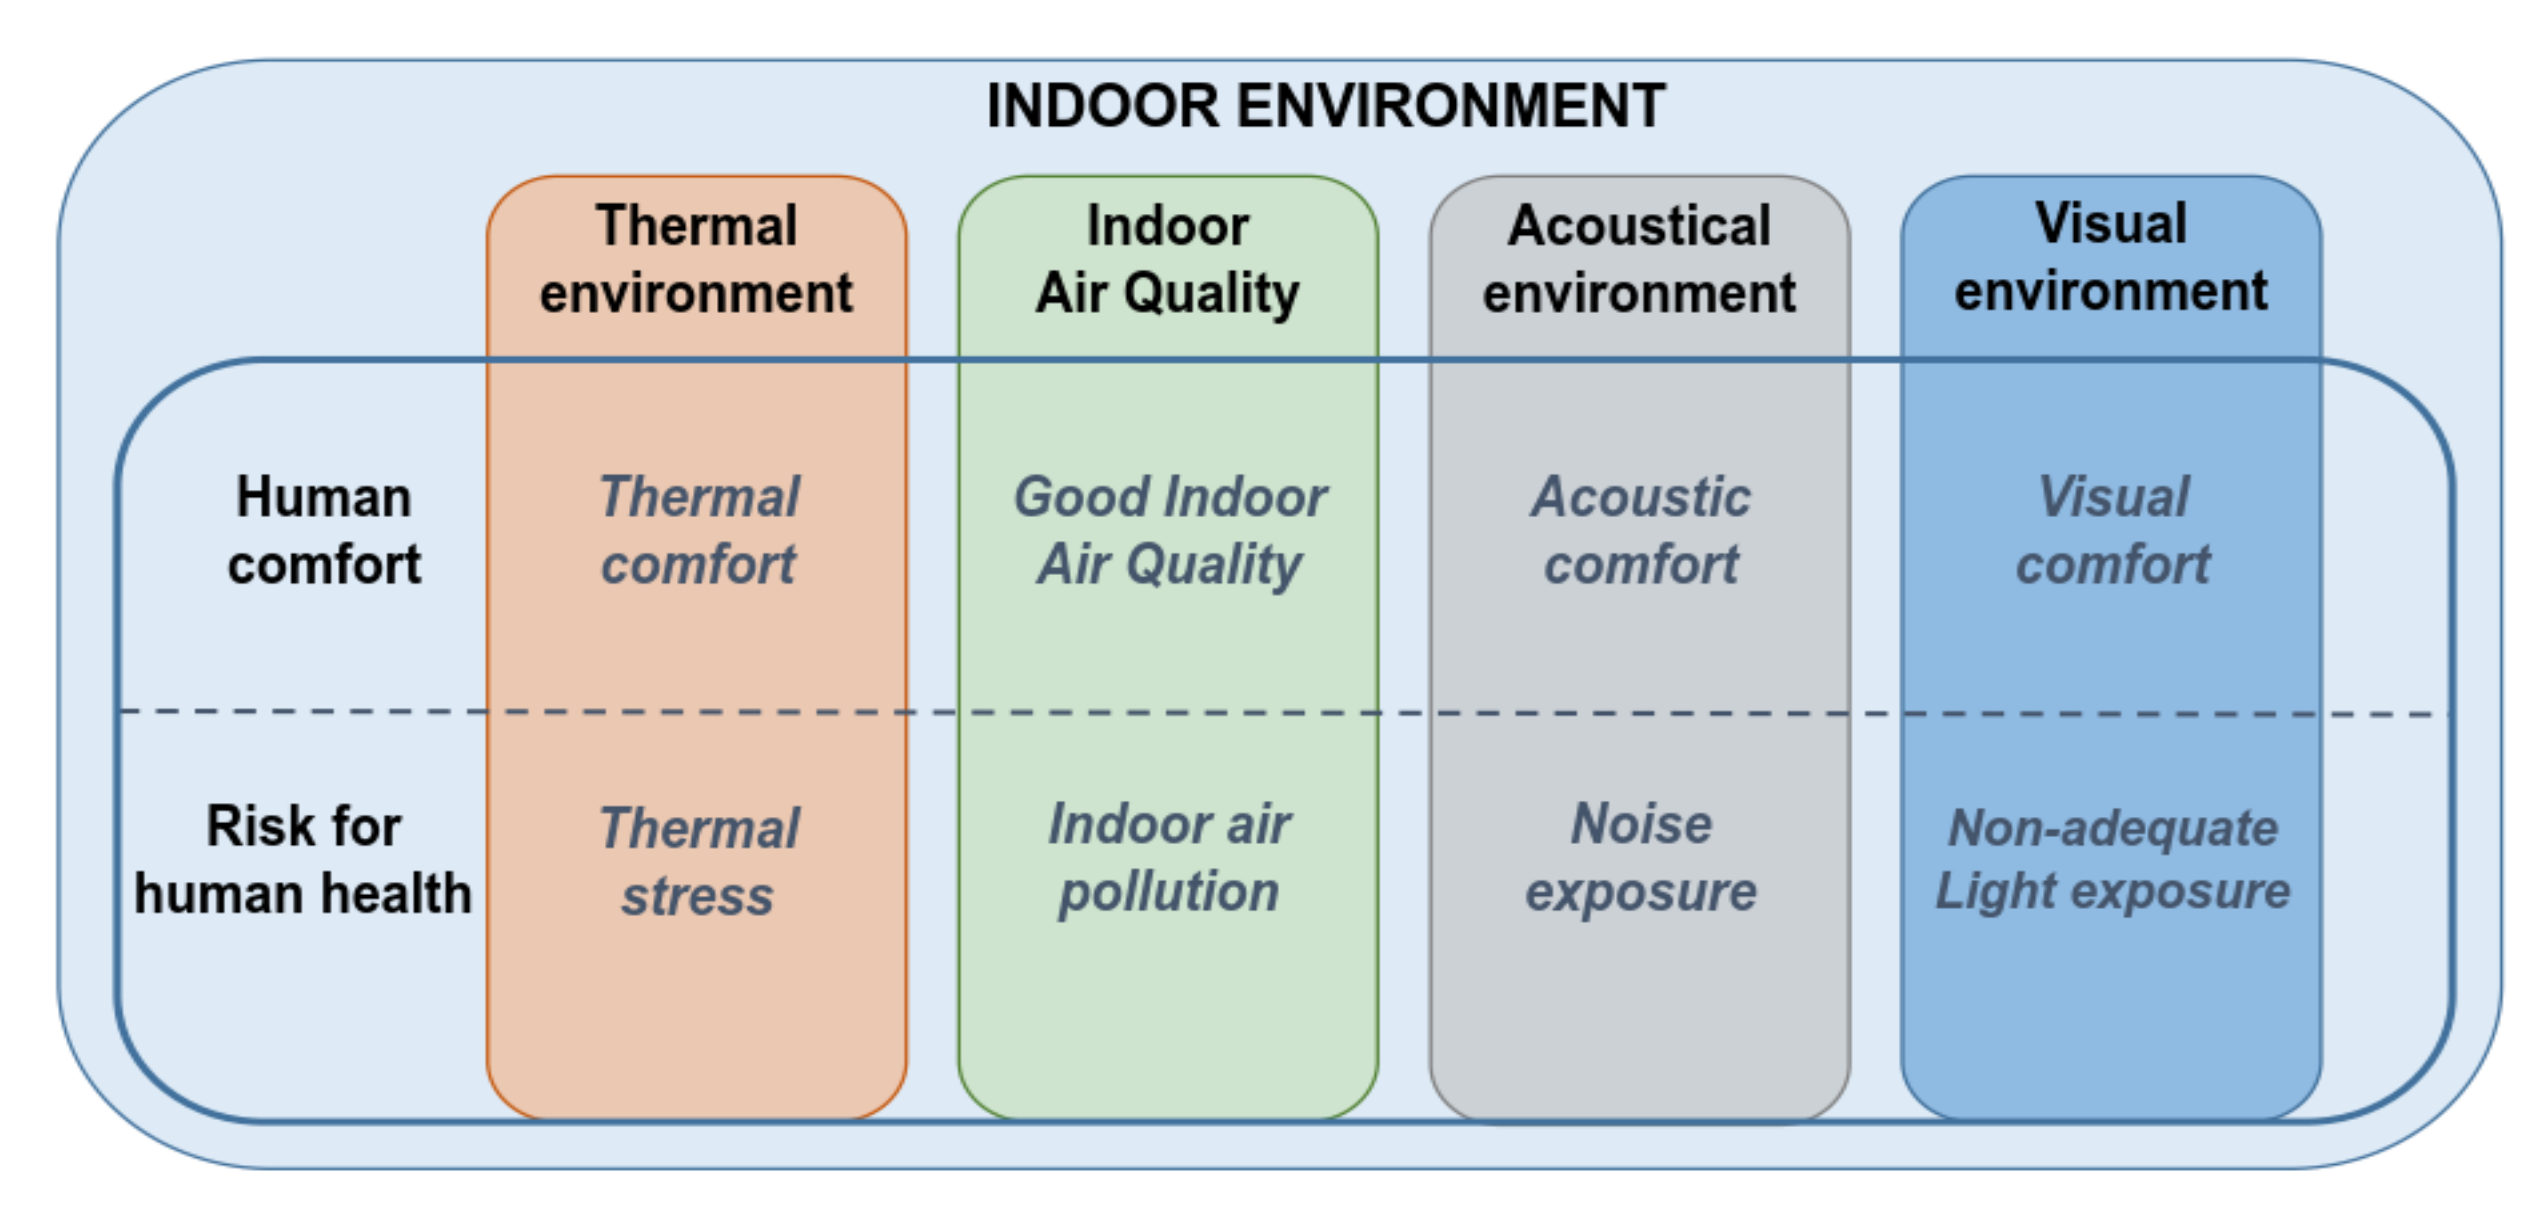 Atmosphere Free Full Text An Extensive Collection Of Evaluation Indicators To Assess Occupants Health And Comfort In Indoor Environment Html